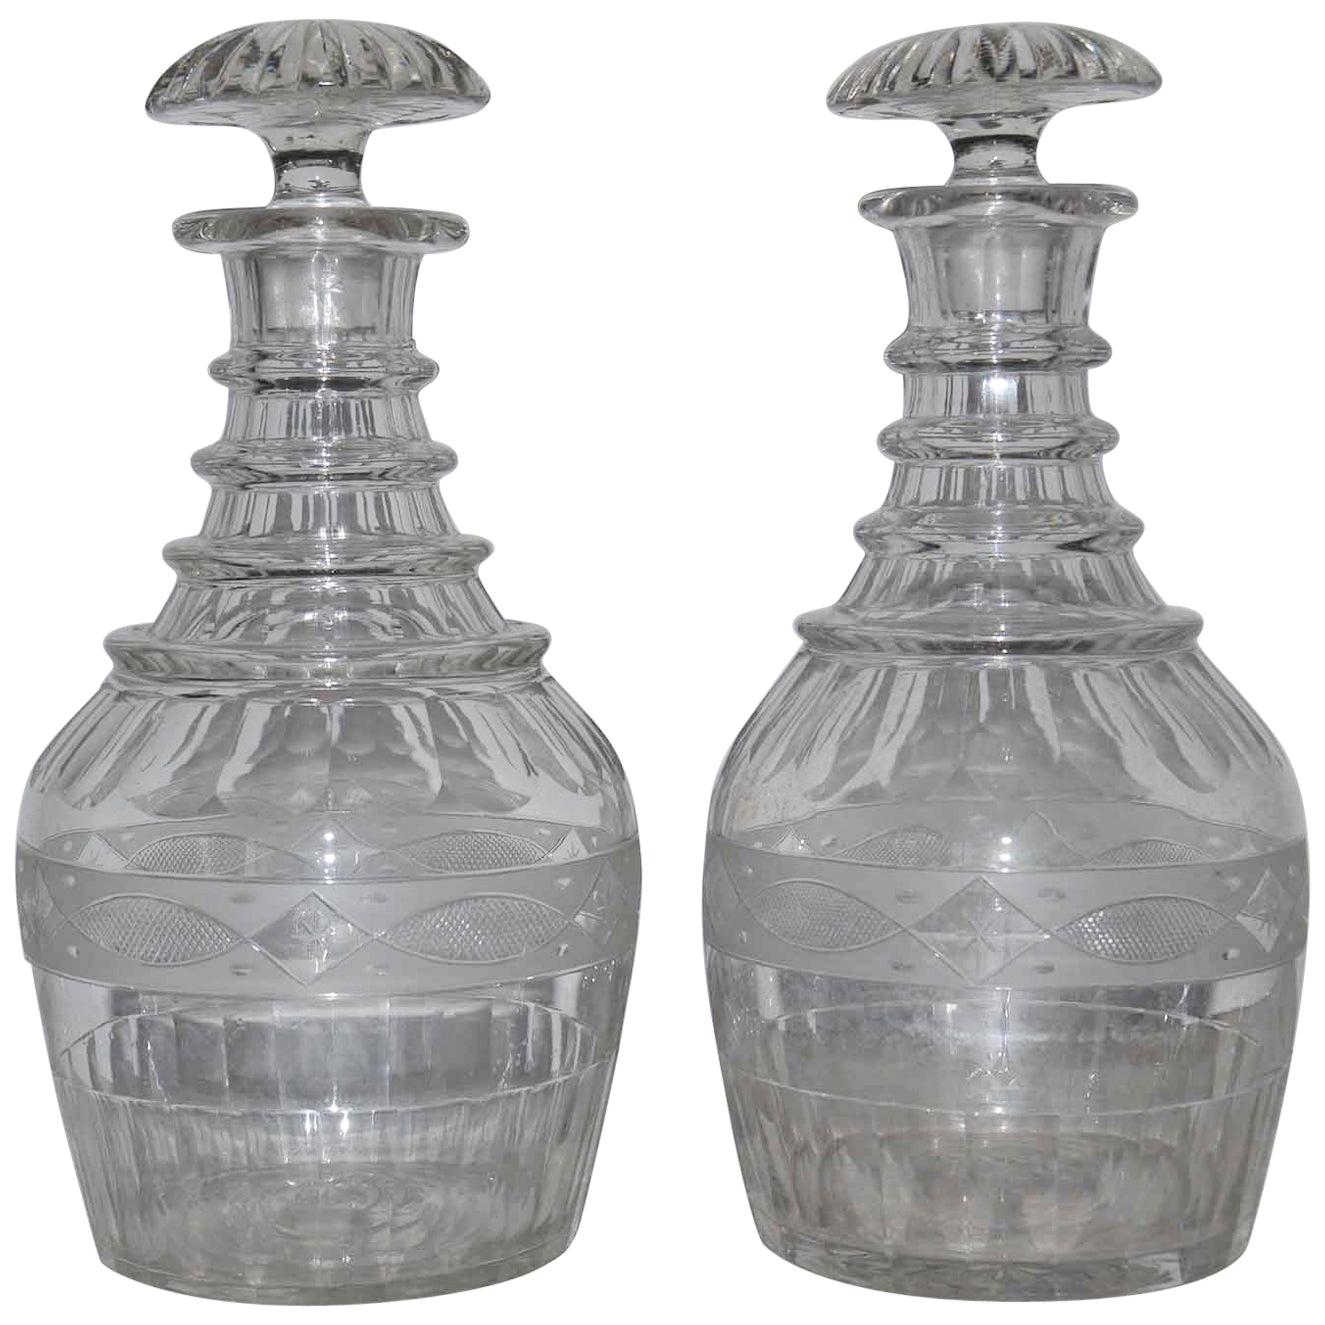 Pair of Antique Cut Crystal Georgian Style Decanters